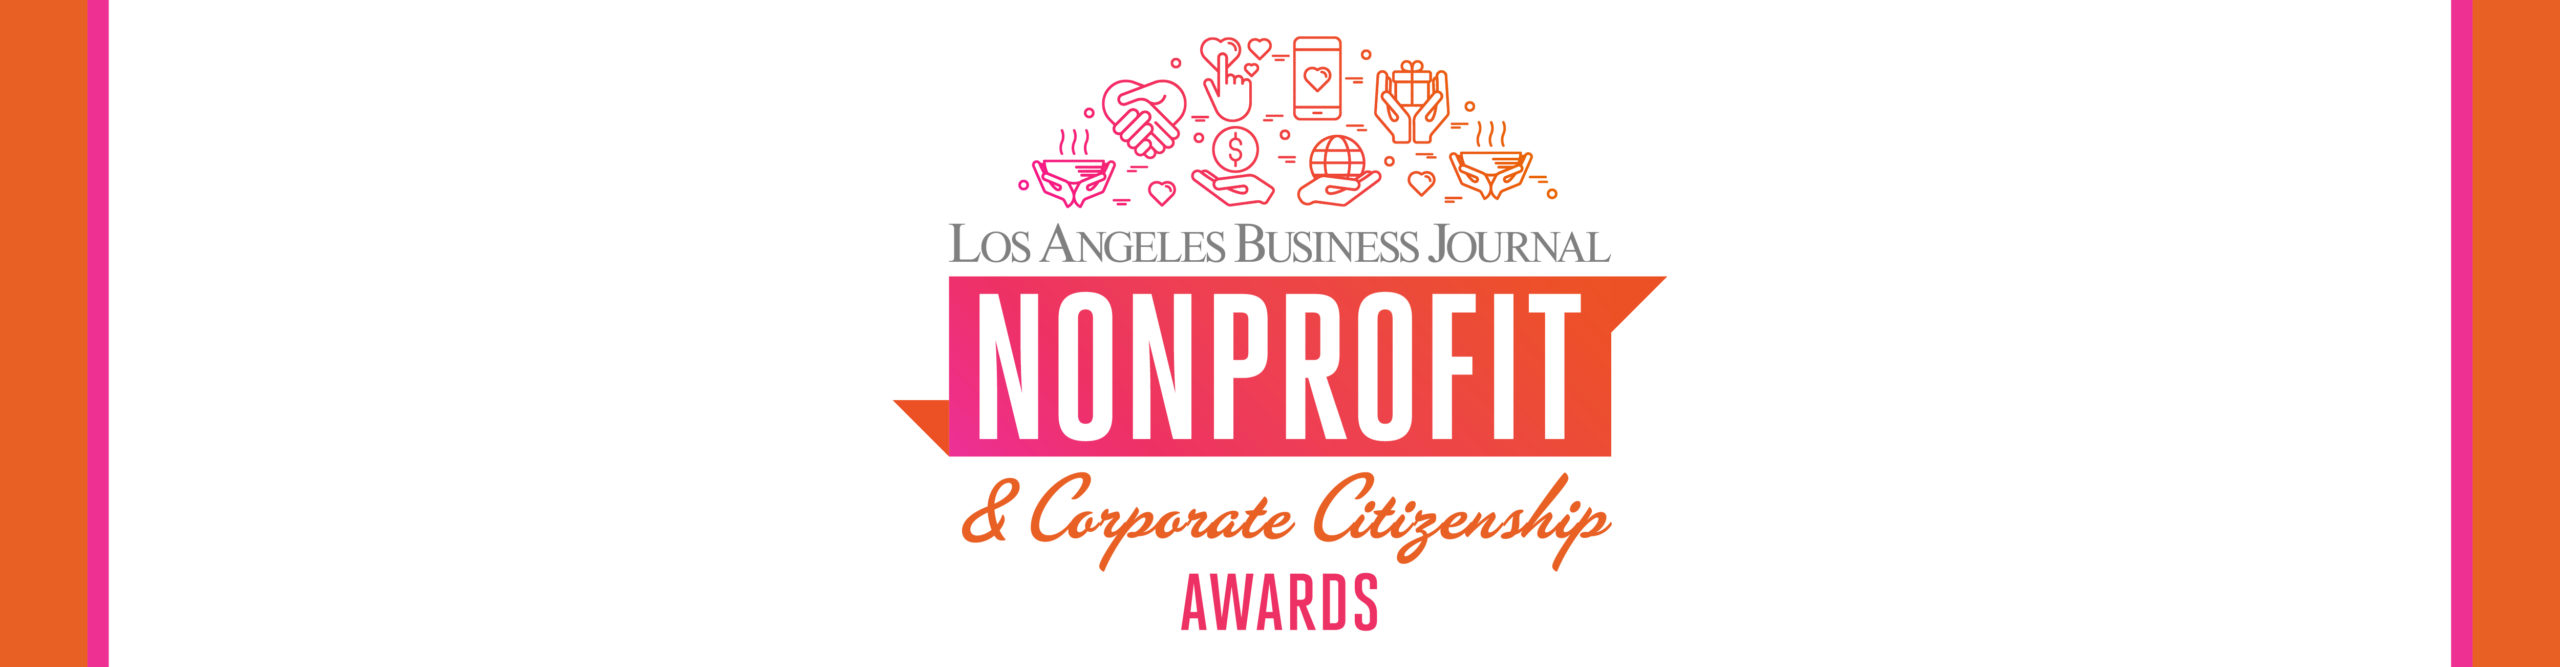 Los Angeles Business Journal Nonprofit & Corporate Citizenship Awards Event Banner